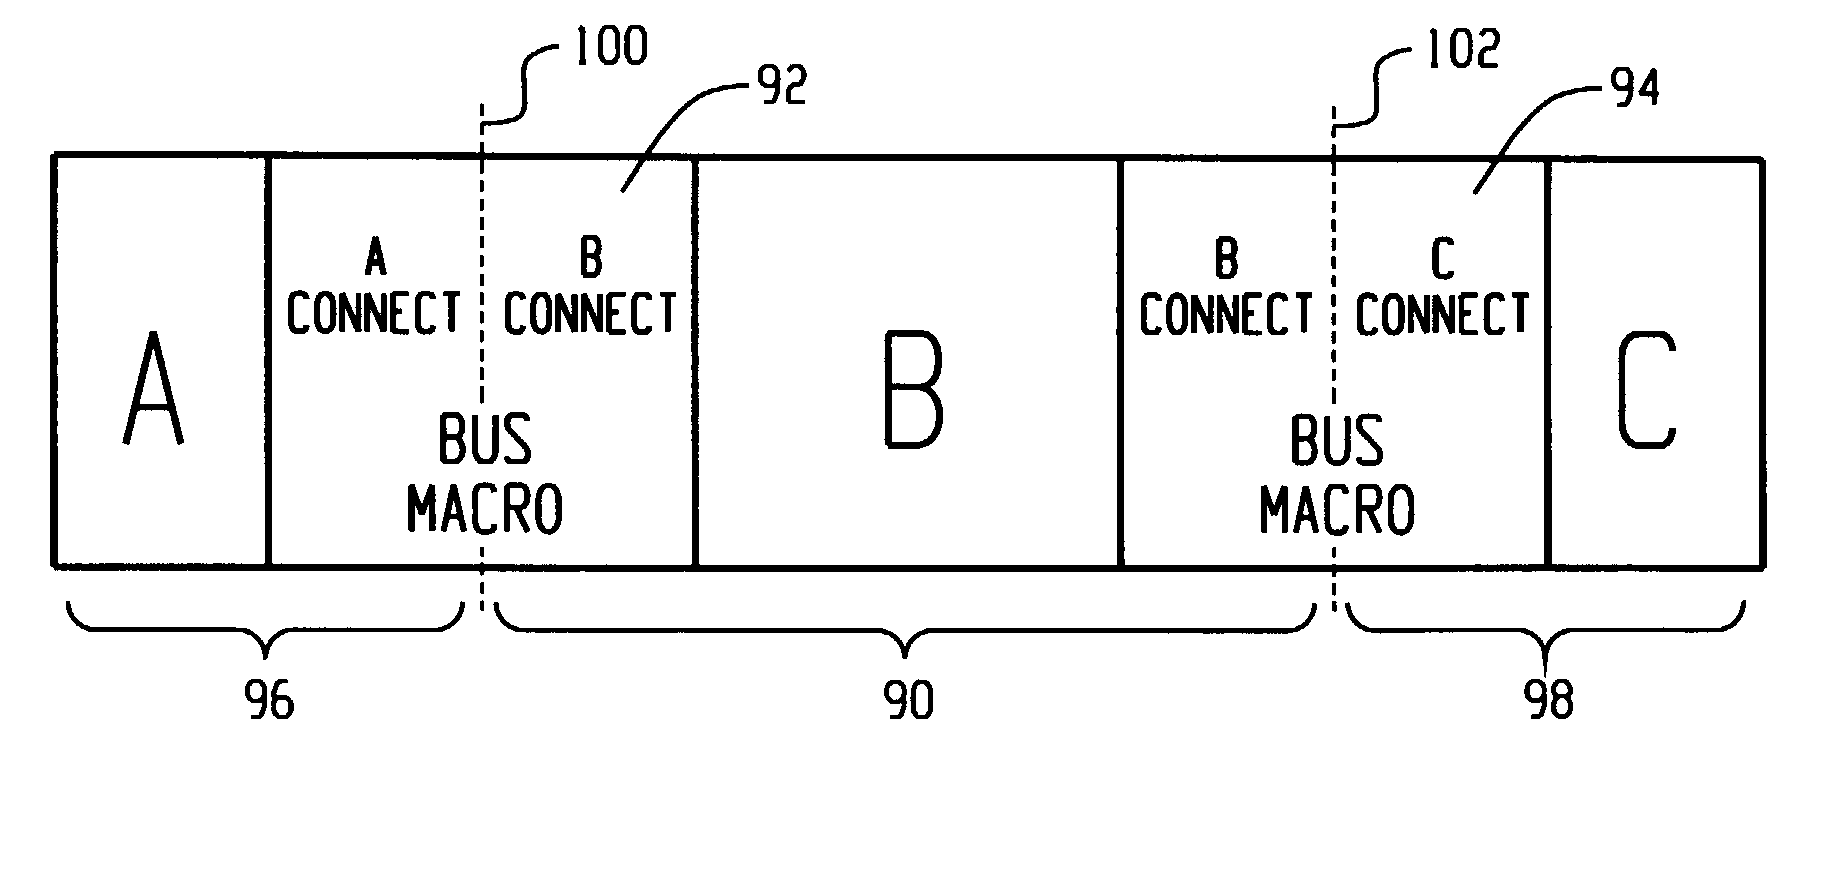 Partial reconfiguration of a programmable gate array using a bus macro